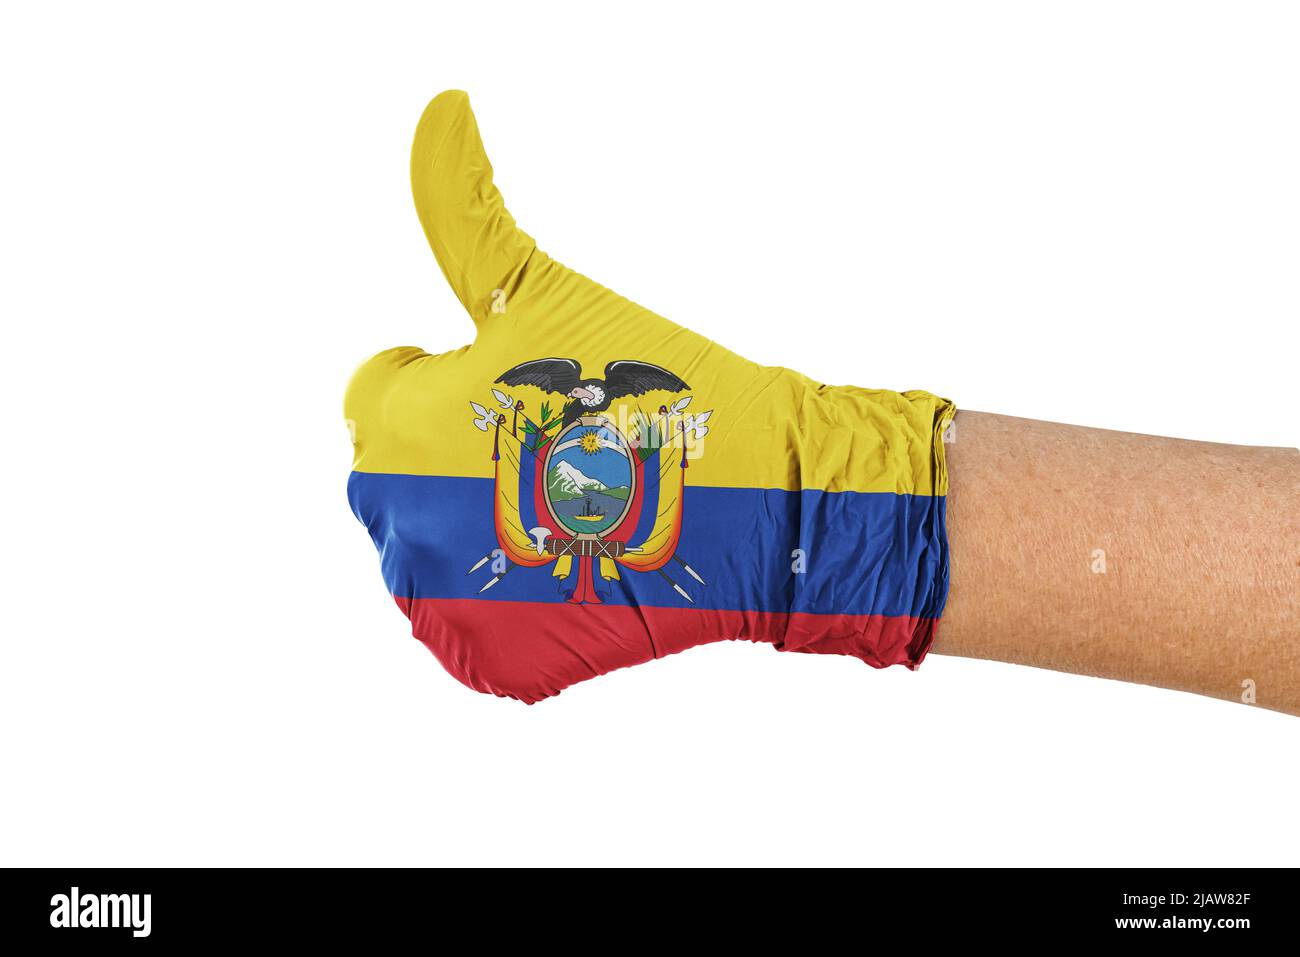 Ecuador flag on a medical glove showing thumbs up sign Stock Photo